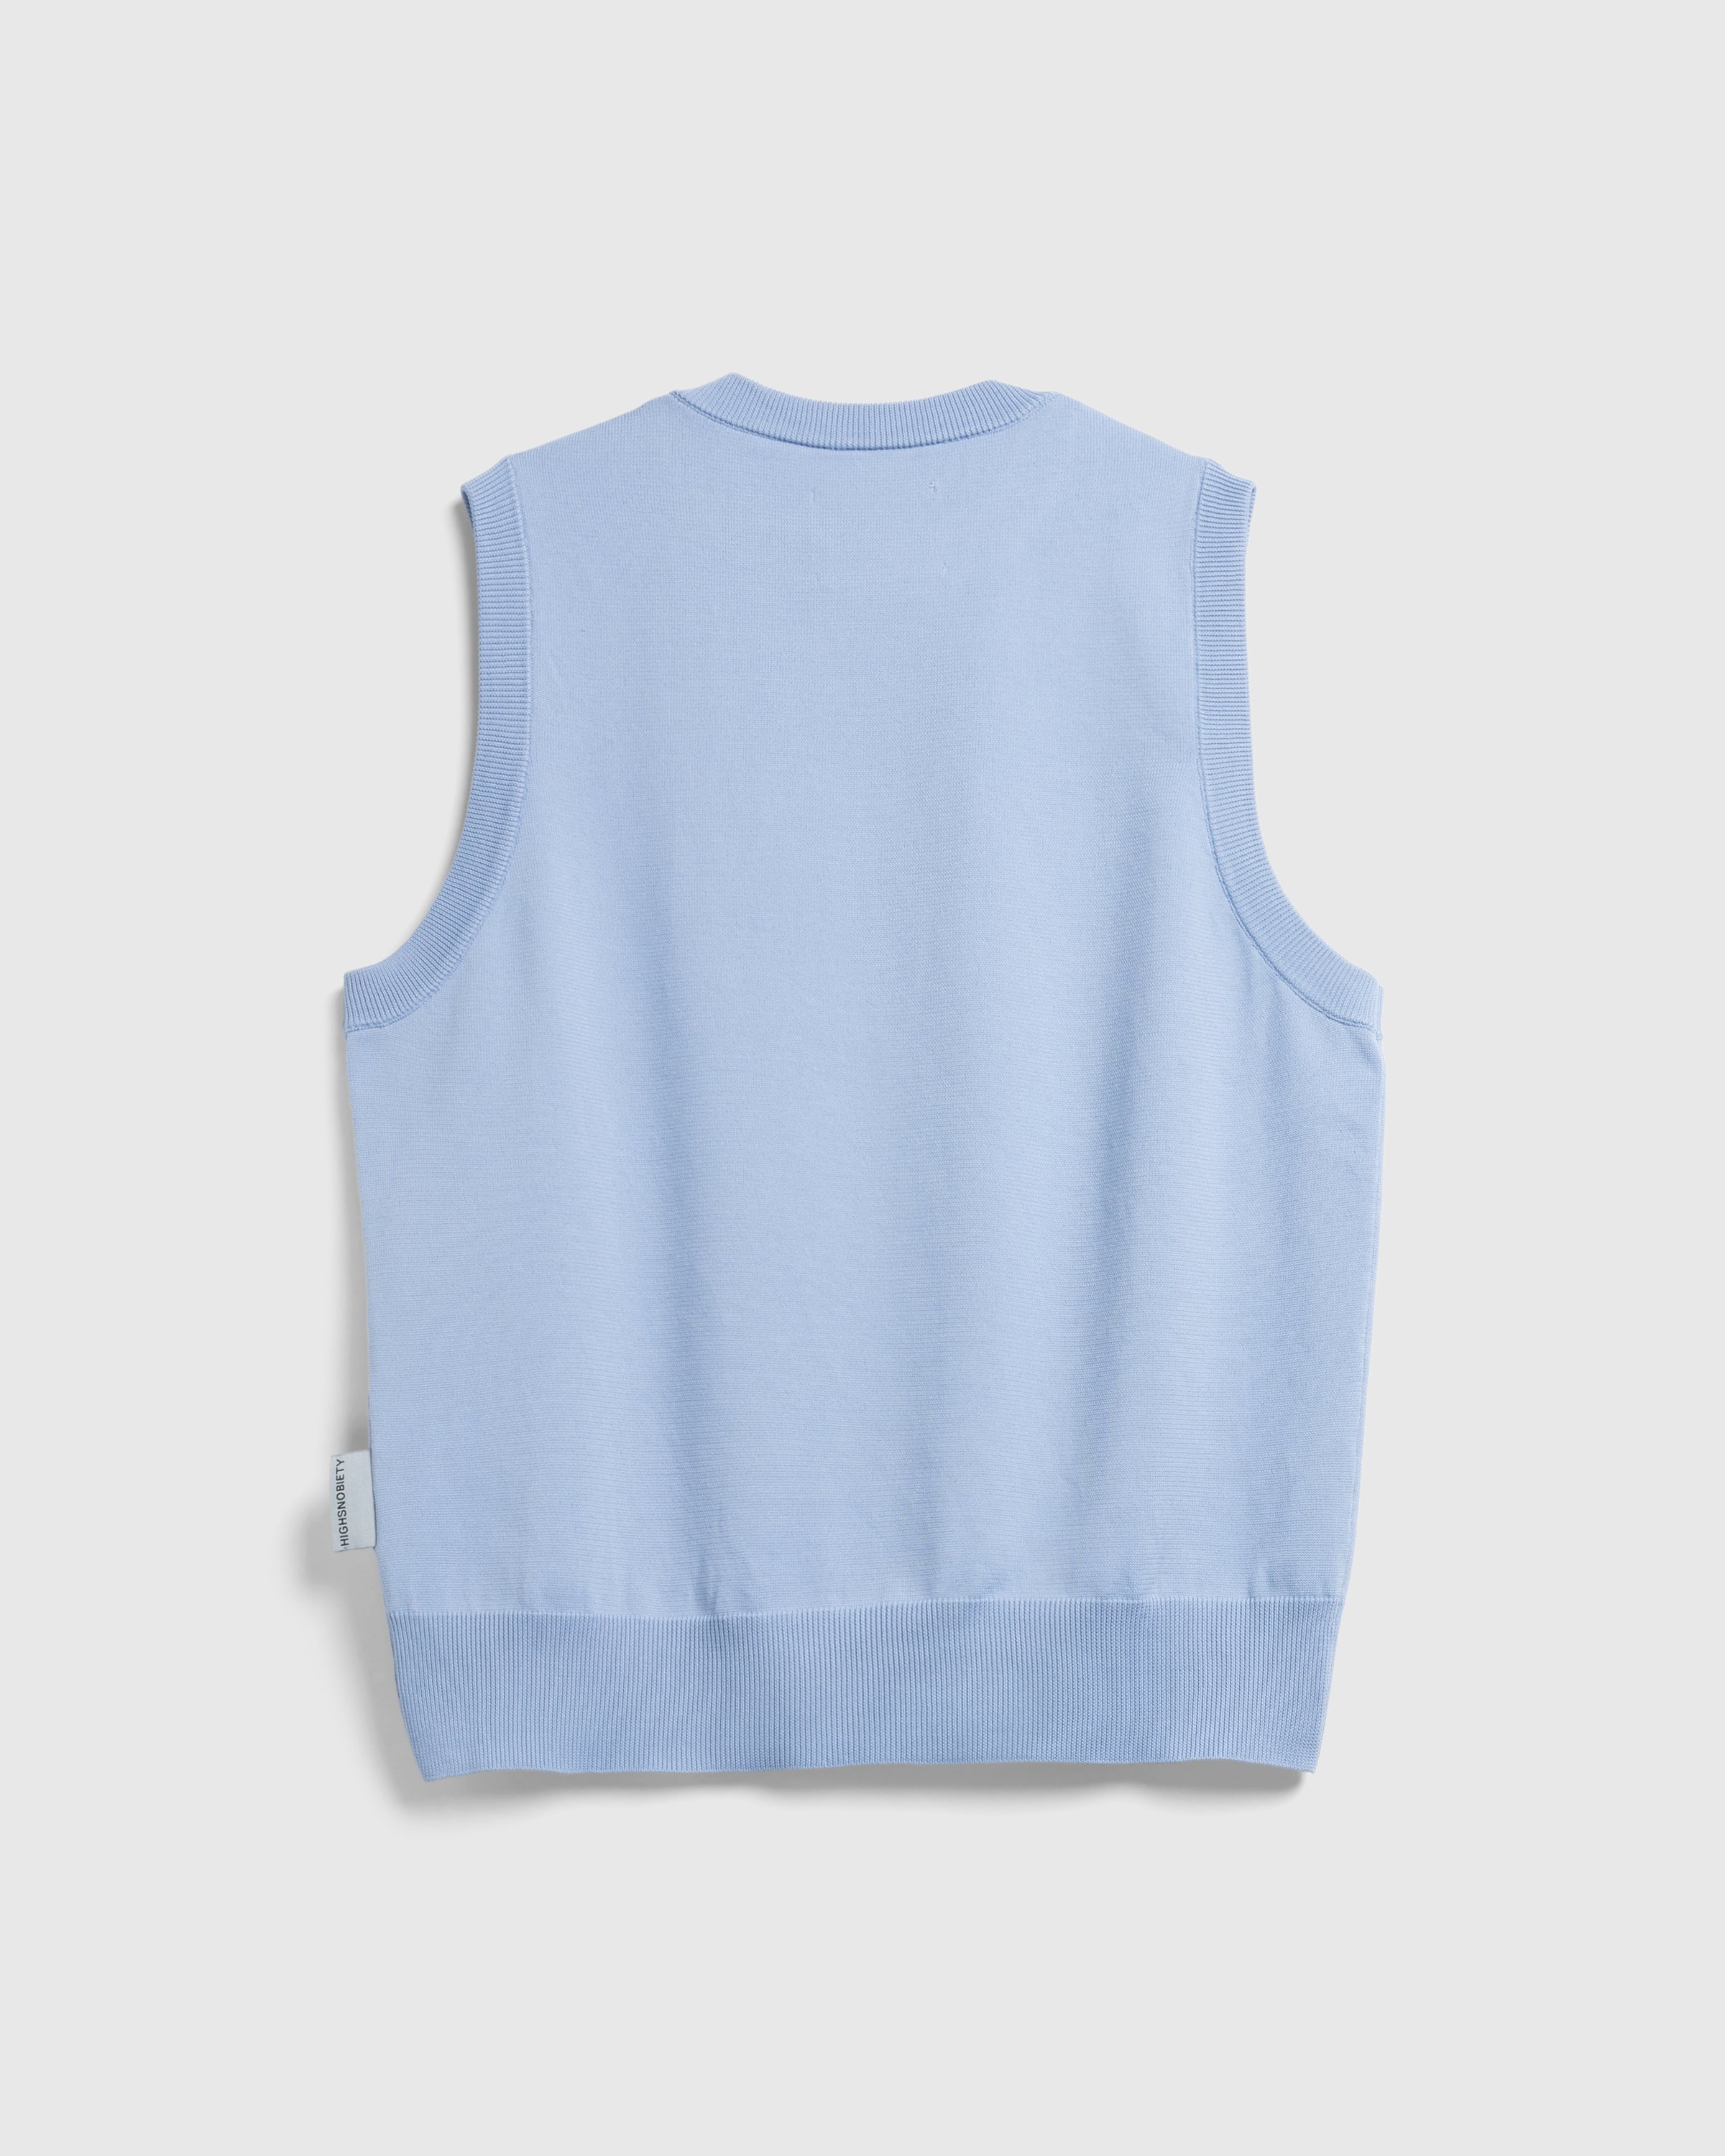 Highsnobiety HS05 - Poly Knit Tank Top - Clothing - Blue - Image 2